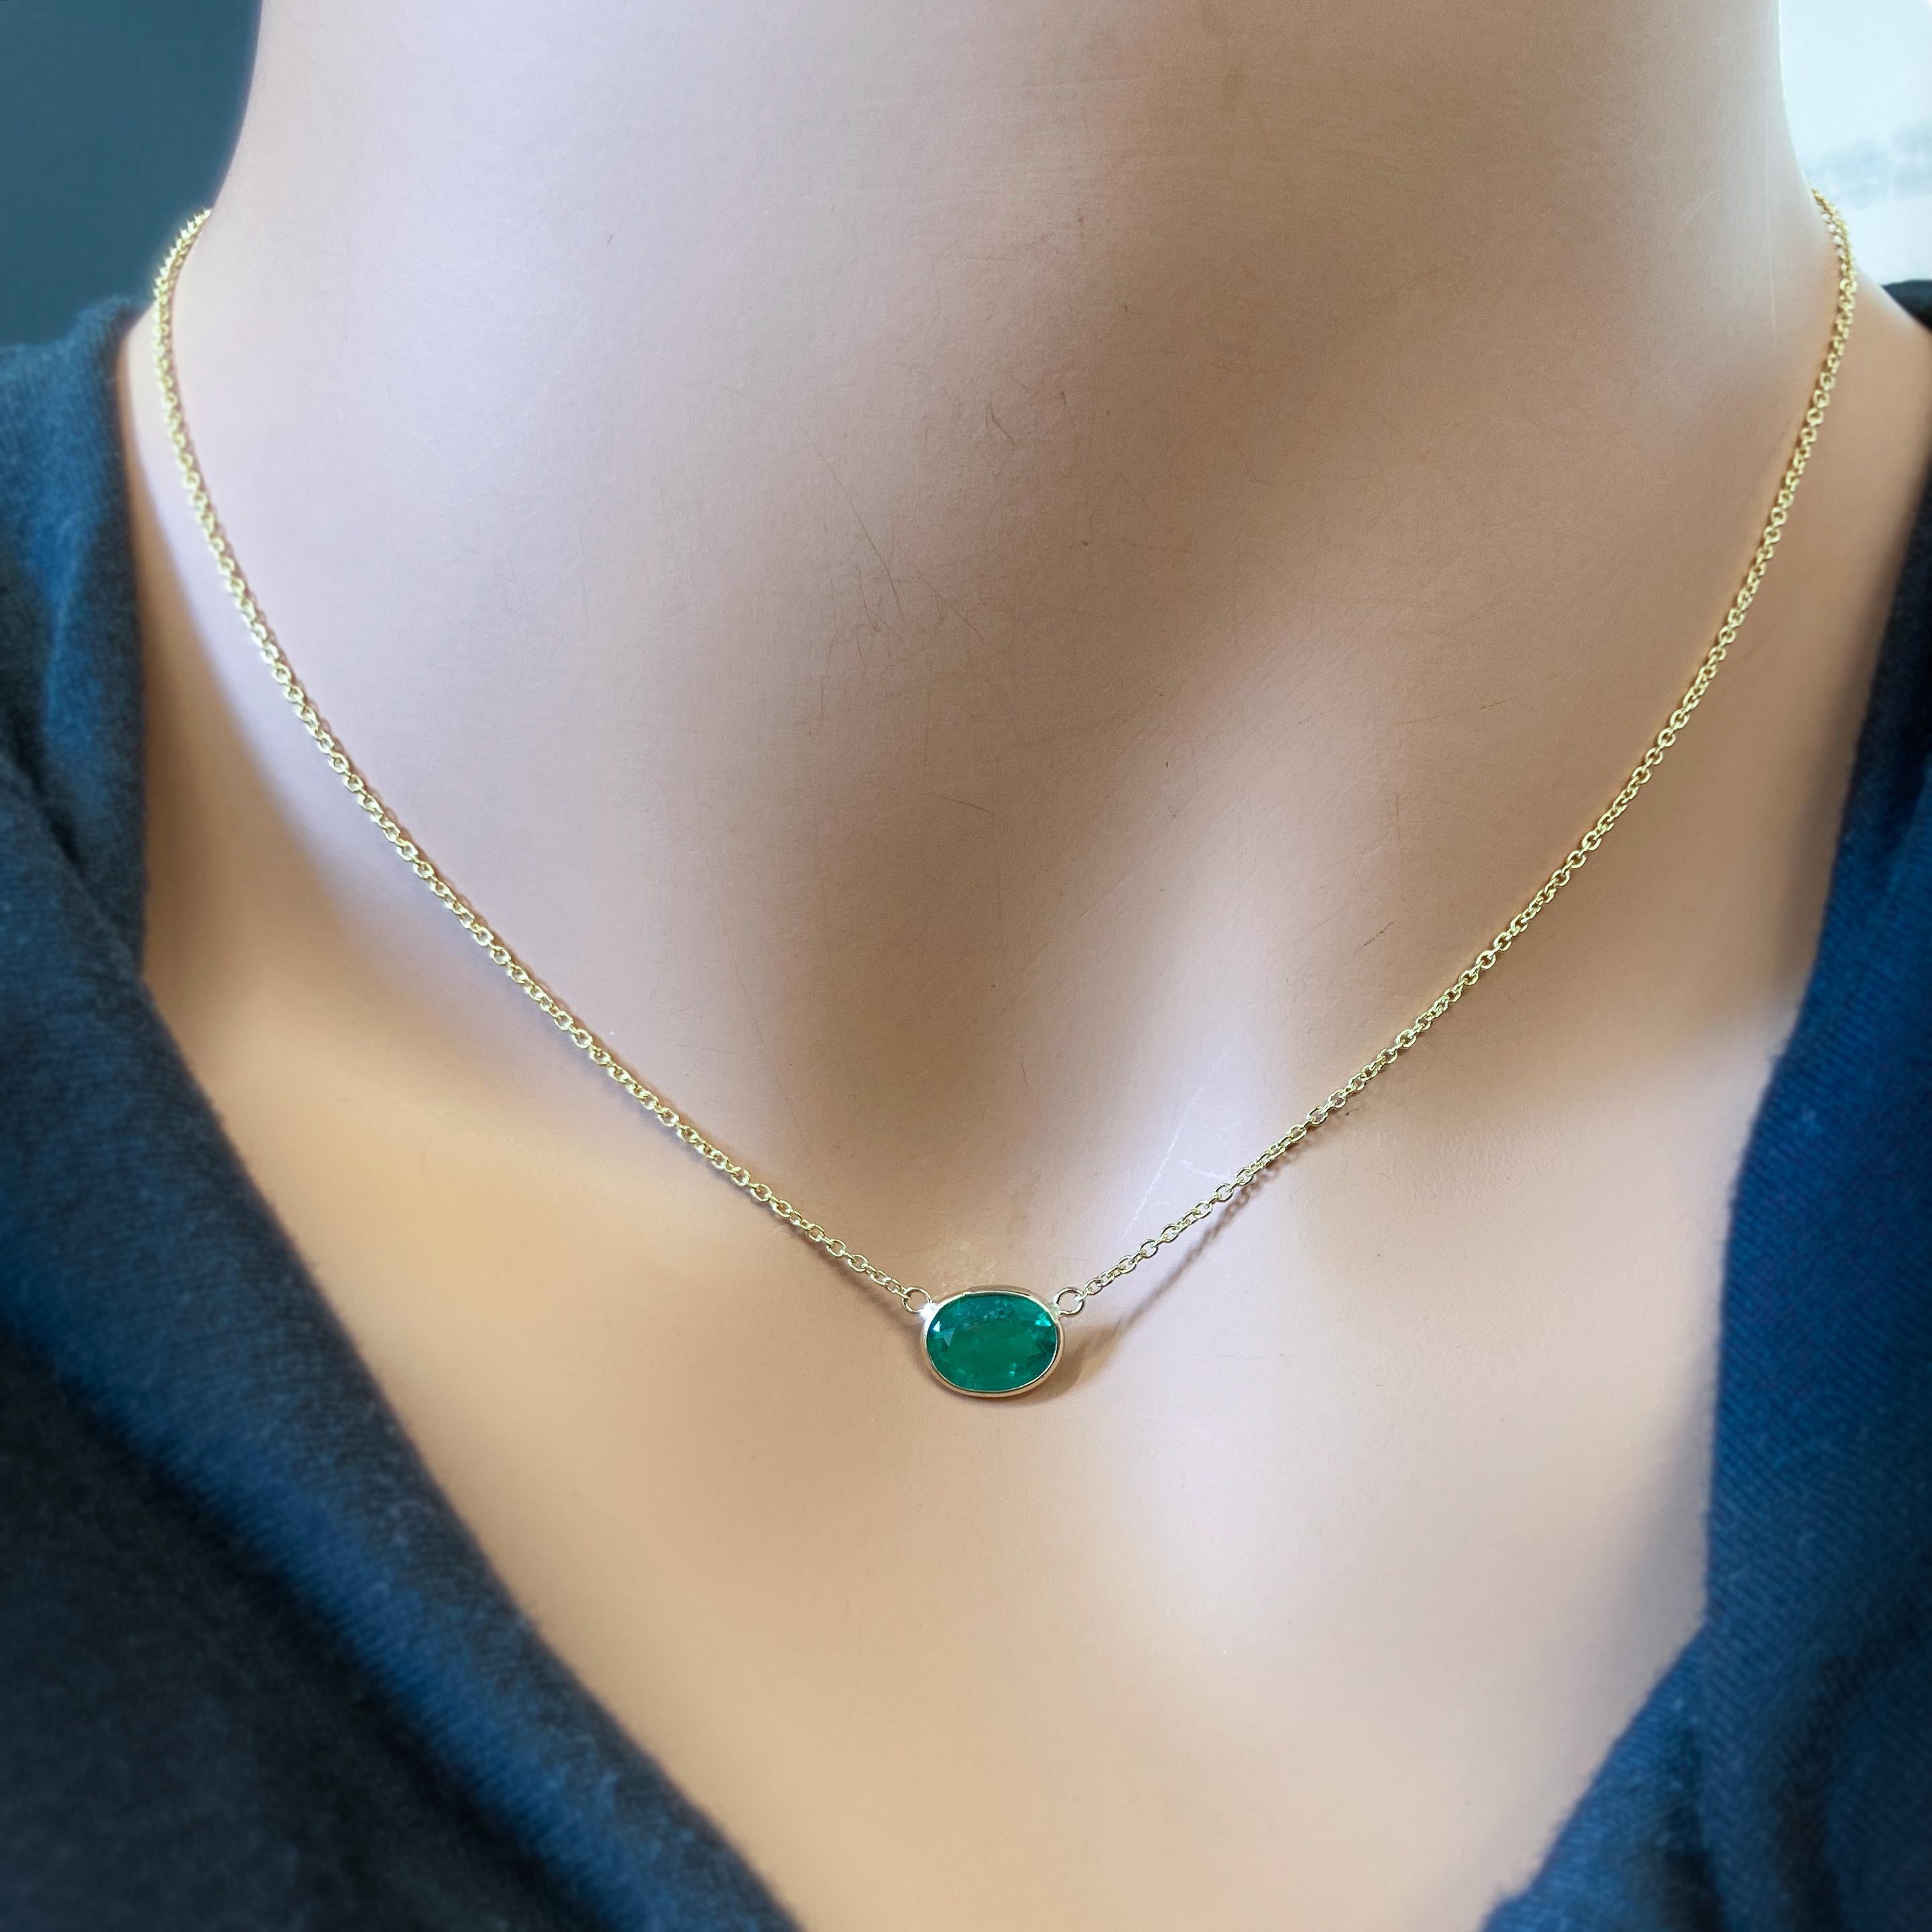 Contemporary 1.44 Carat Green Emerald Oval Cut Fashion Necklaces In 14K Yellow Gold For Sale